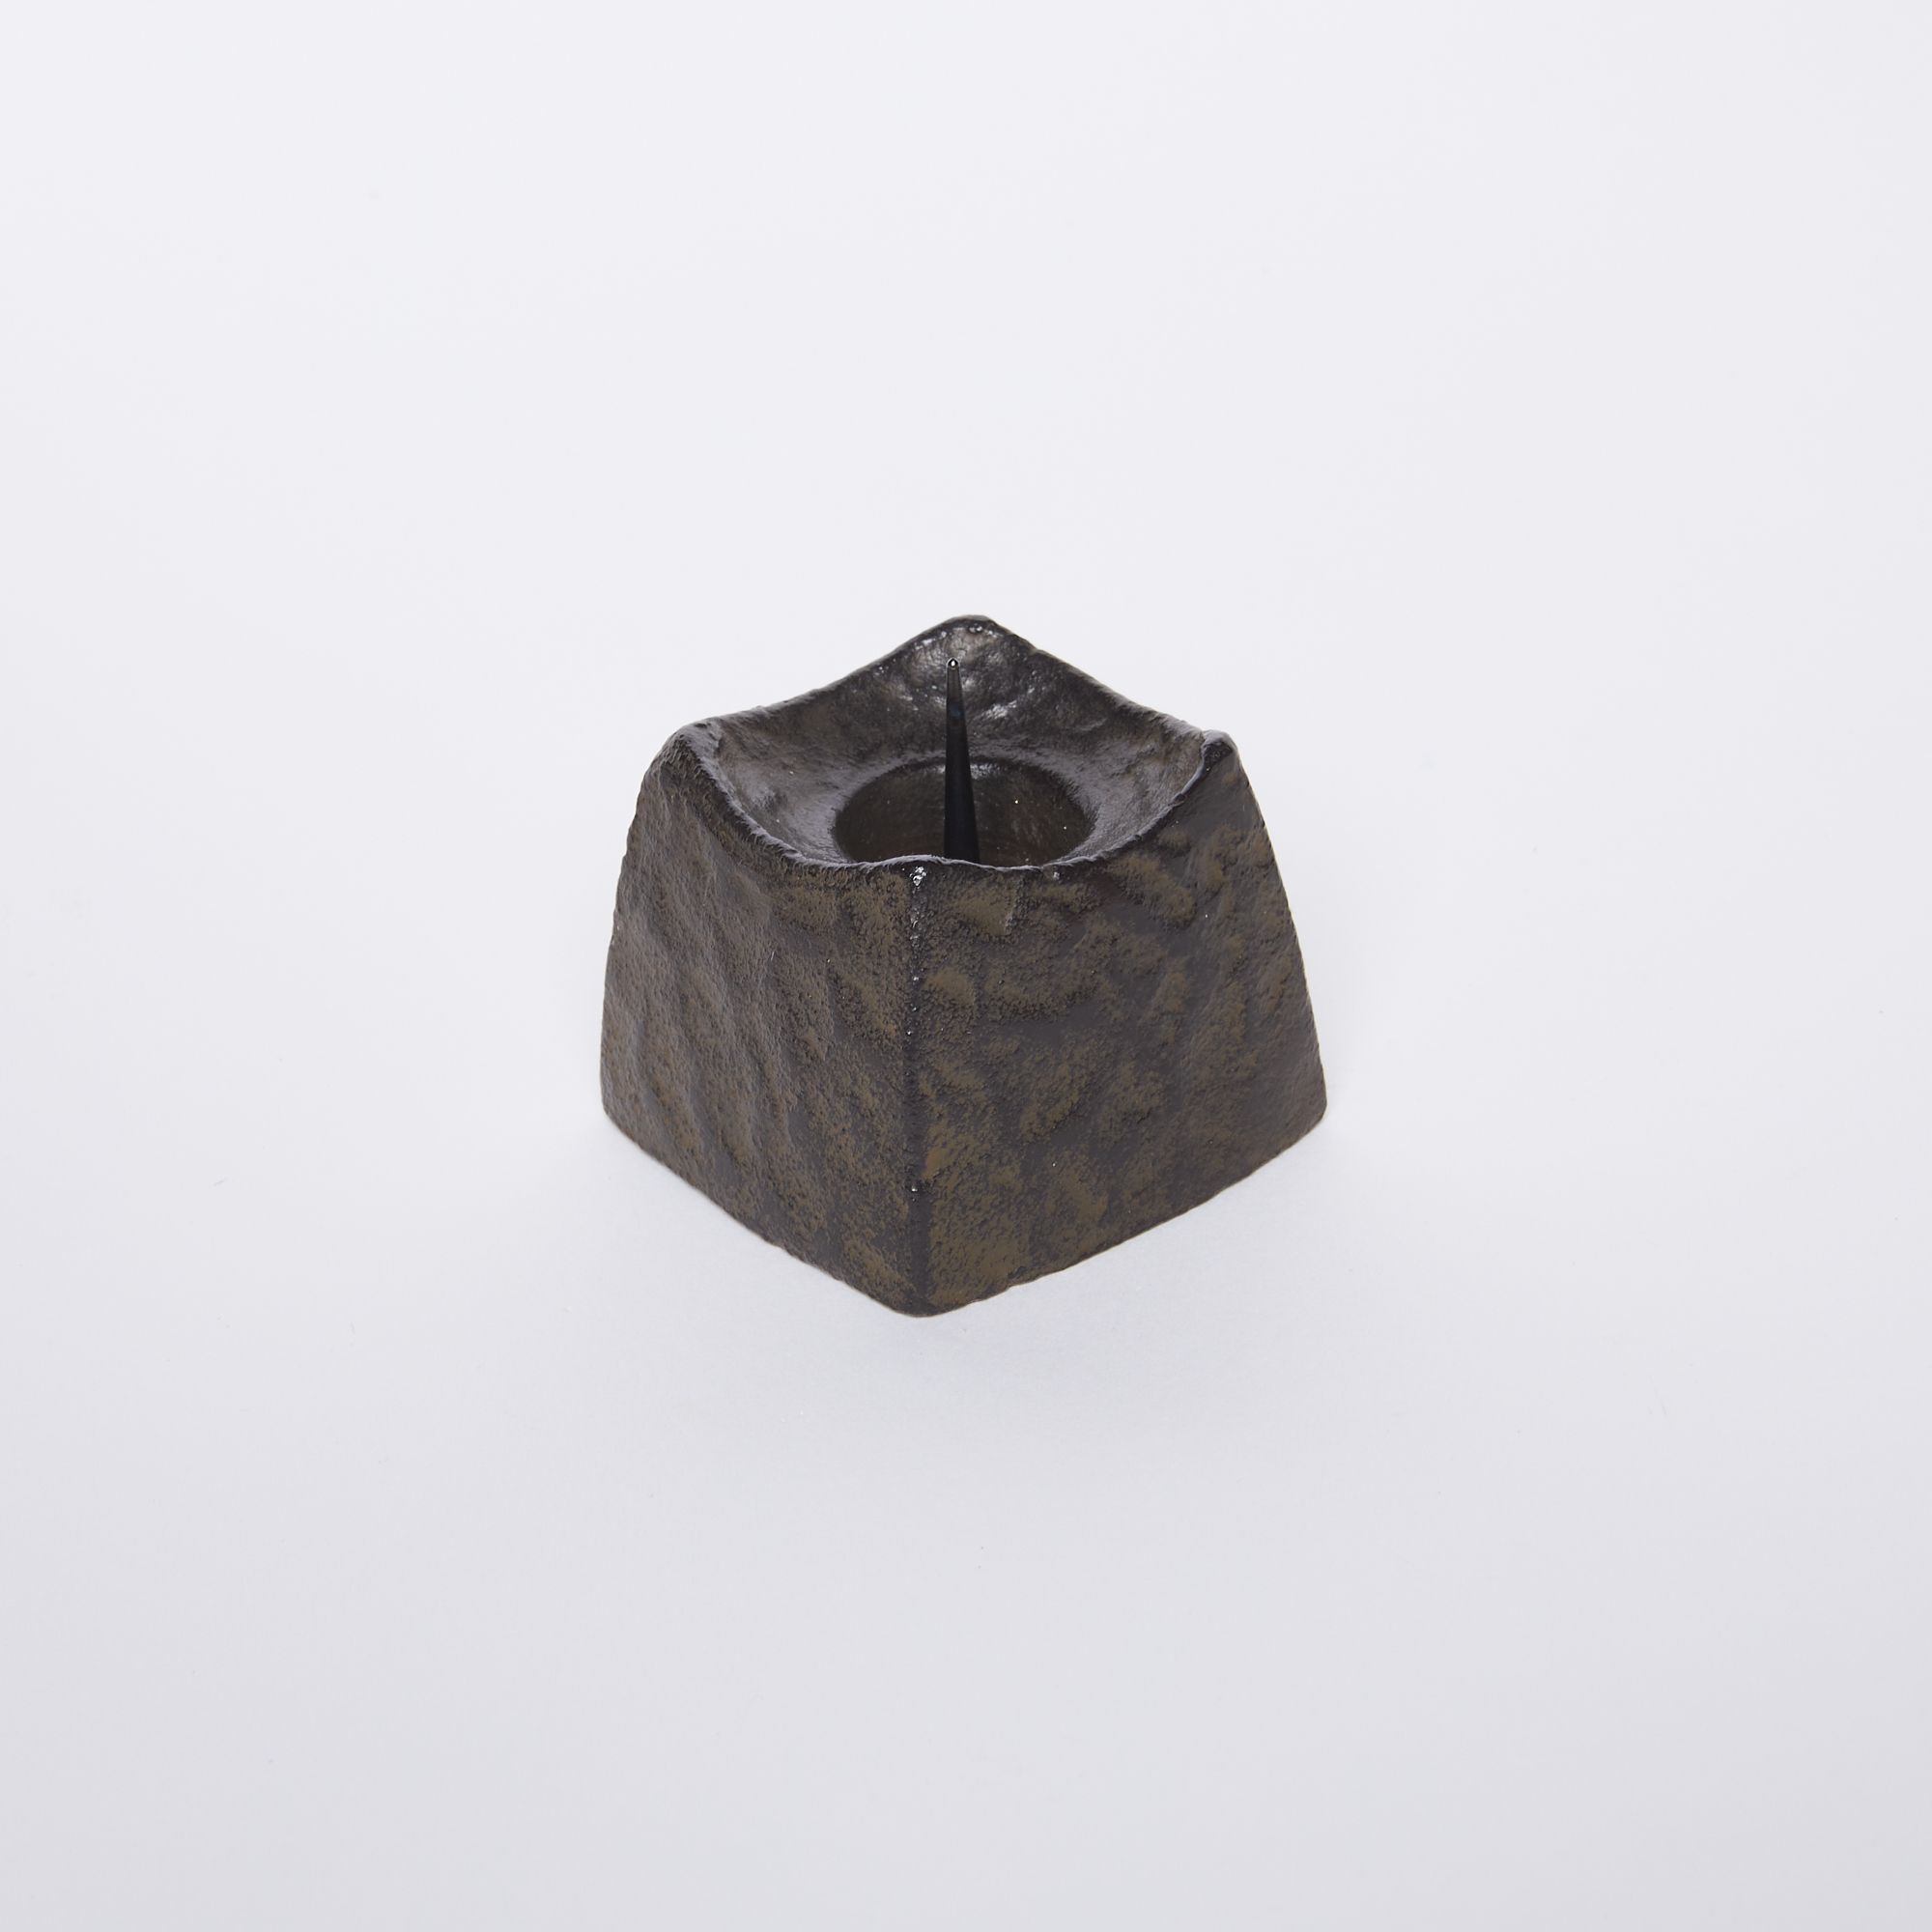 A small black square candle holder with a hammered metal outside and spike in the center